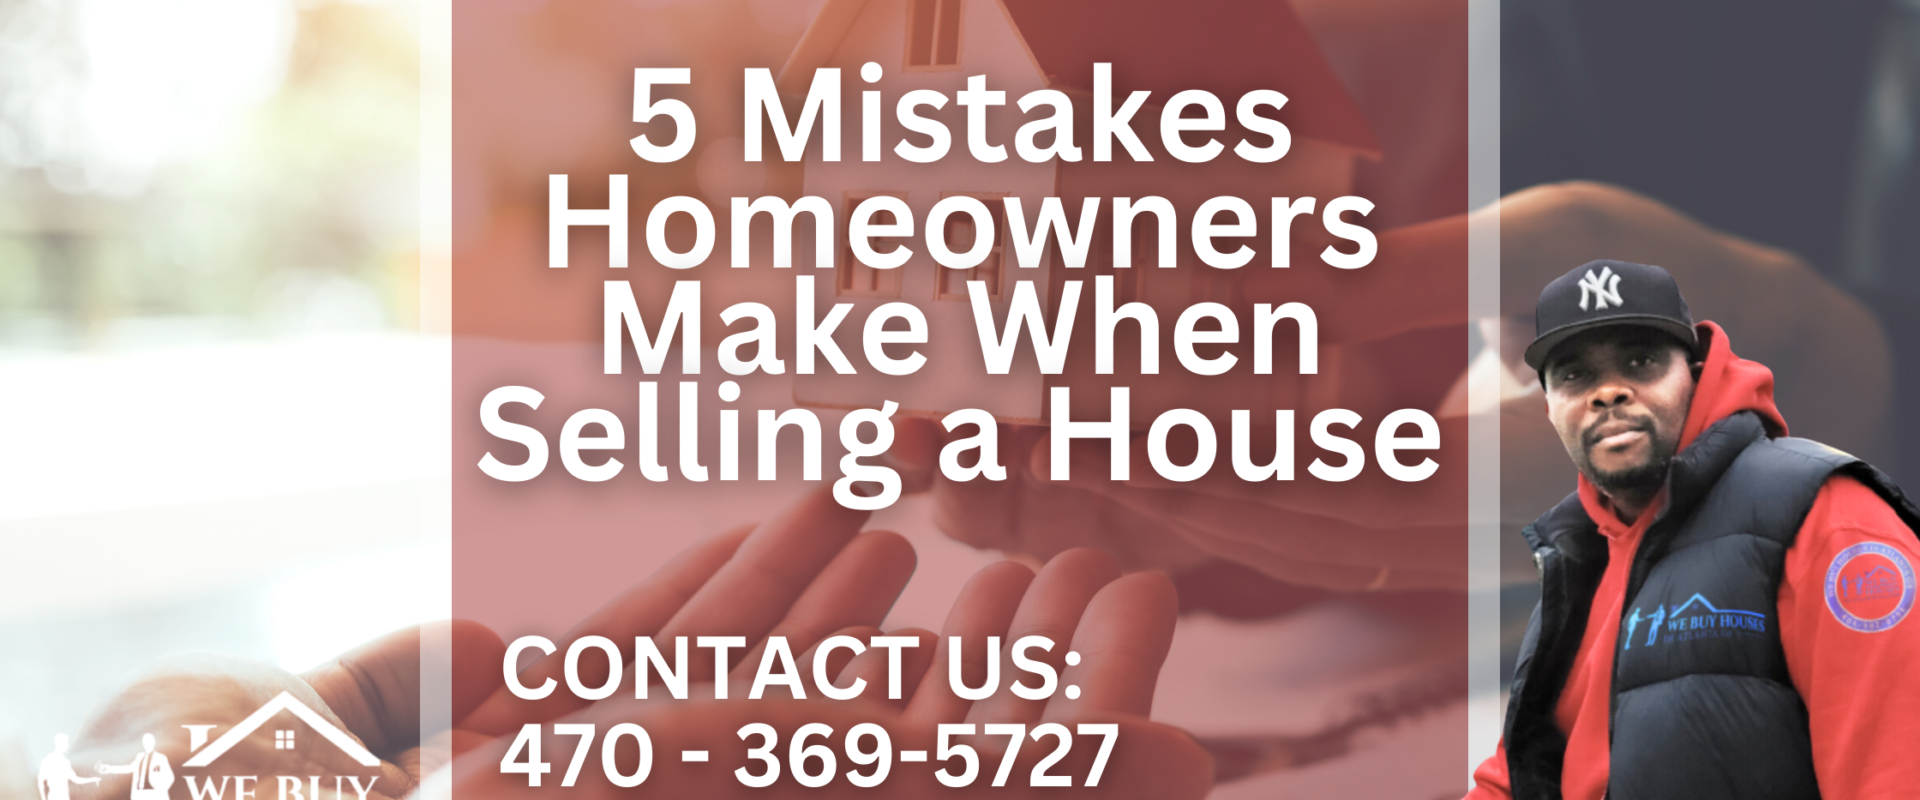 5 Mistakes Homeowners Make When Selling a House